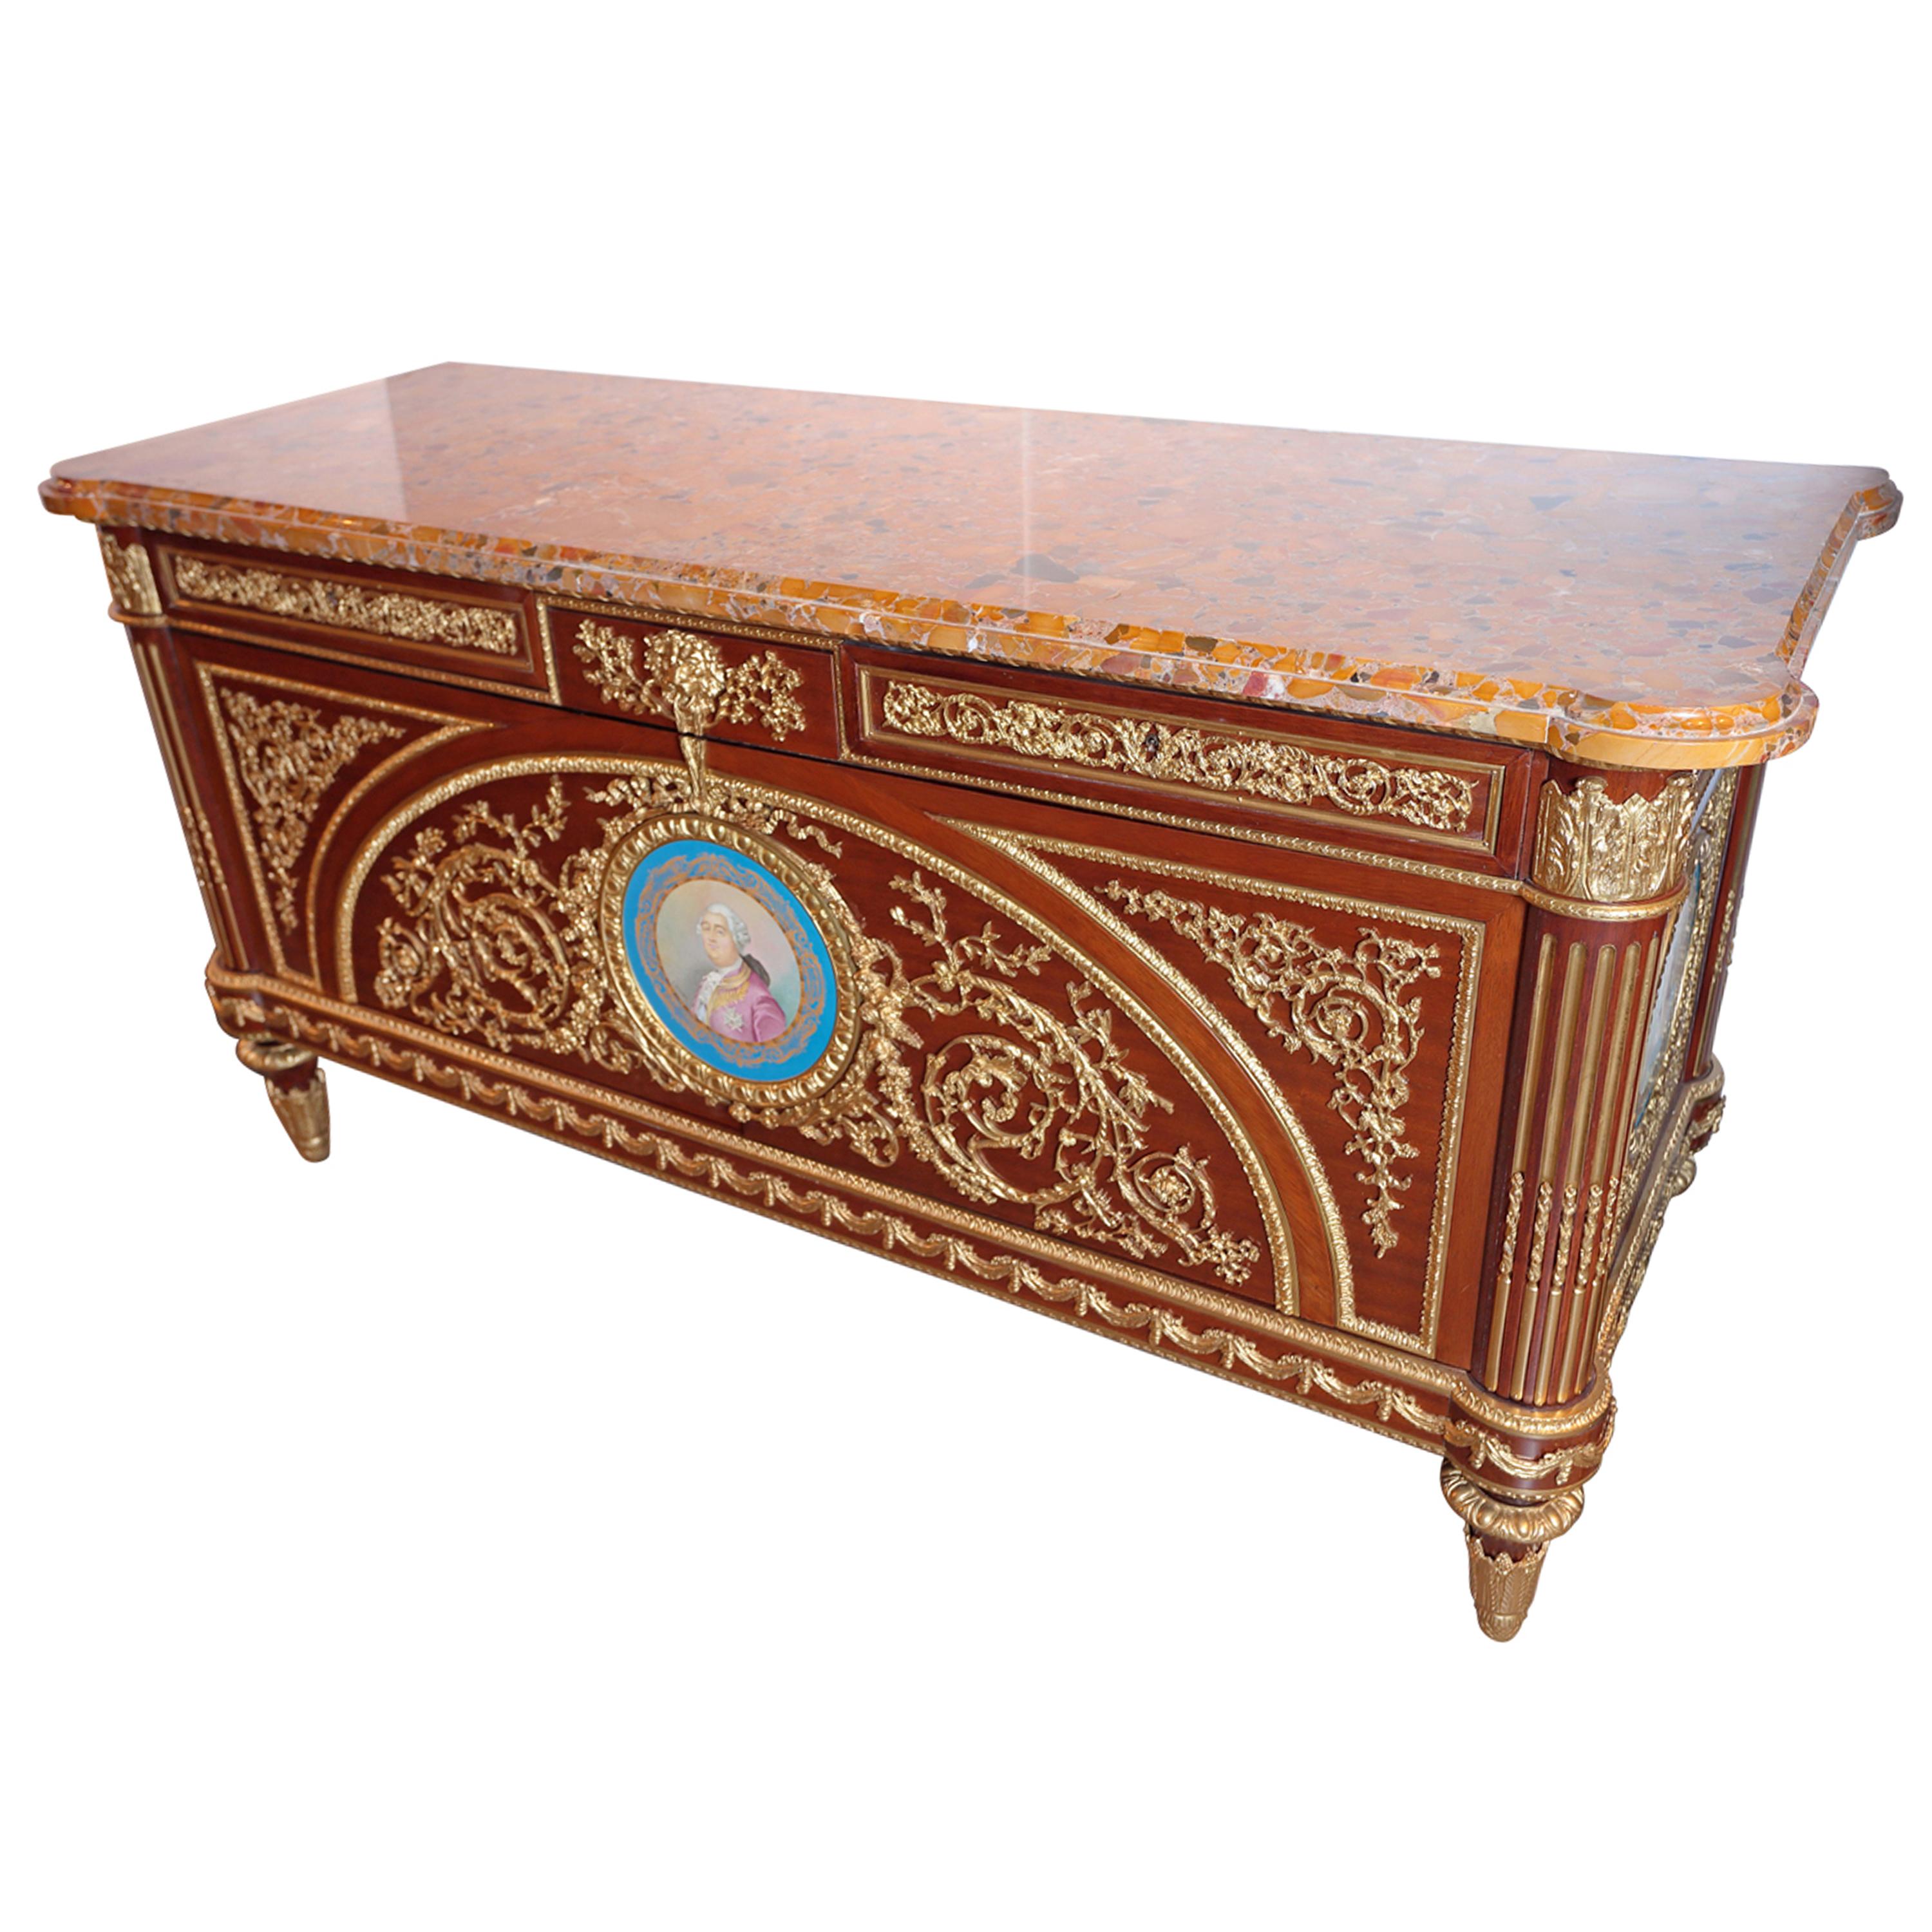 19th Century French Belle Epoque Period Mahogany and Sèvres Porcelain Commode For Sale